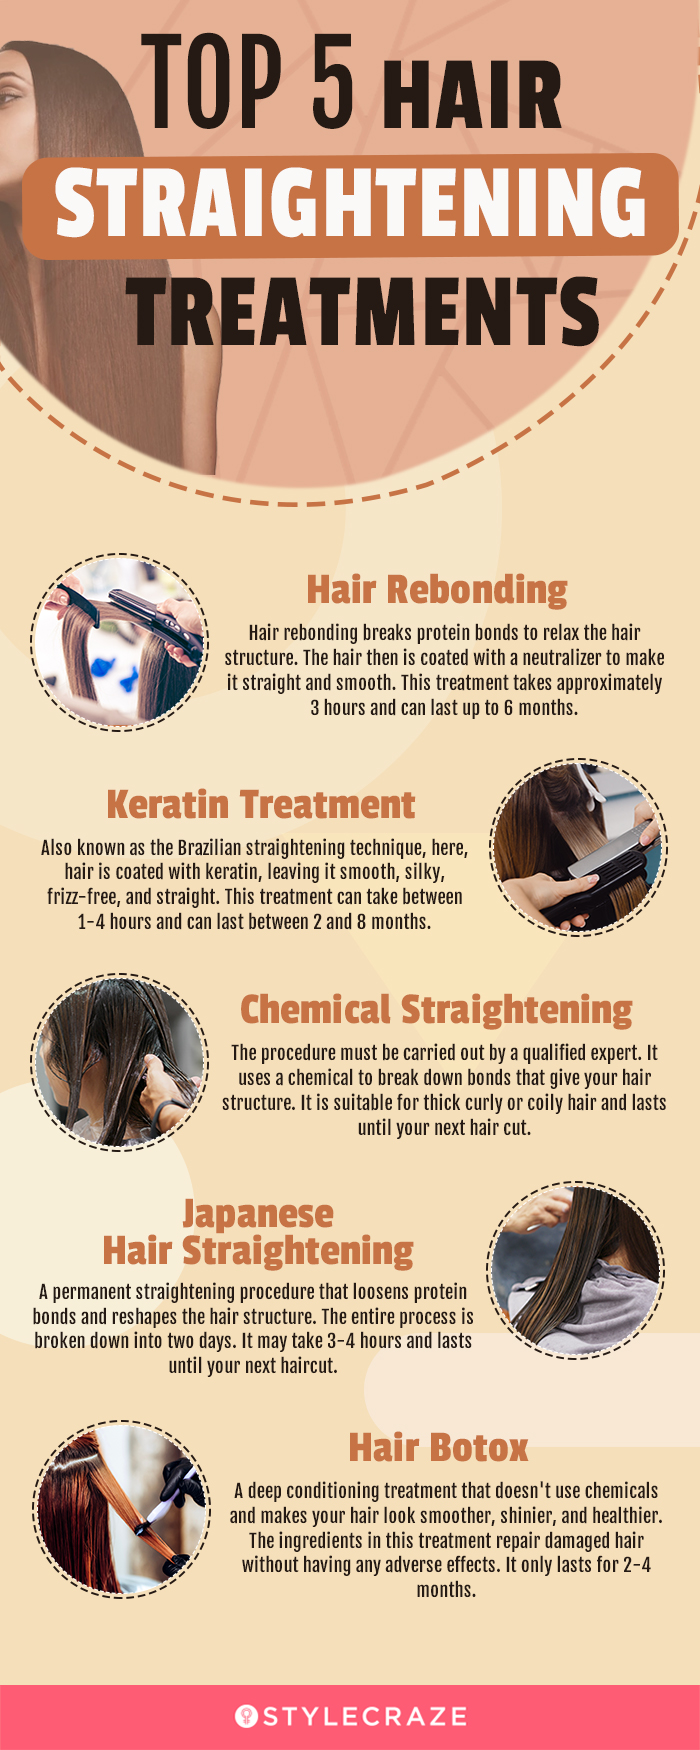 5 Hair Straightening Treatments - Which Is Best For You?